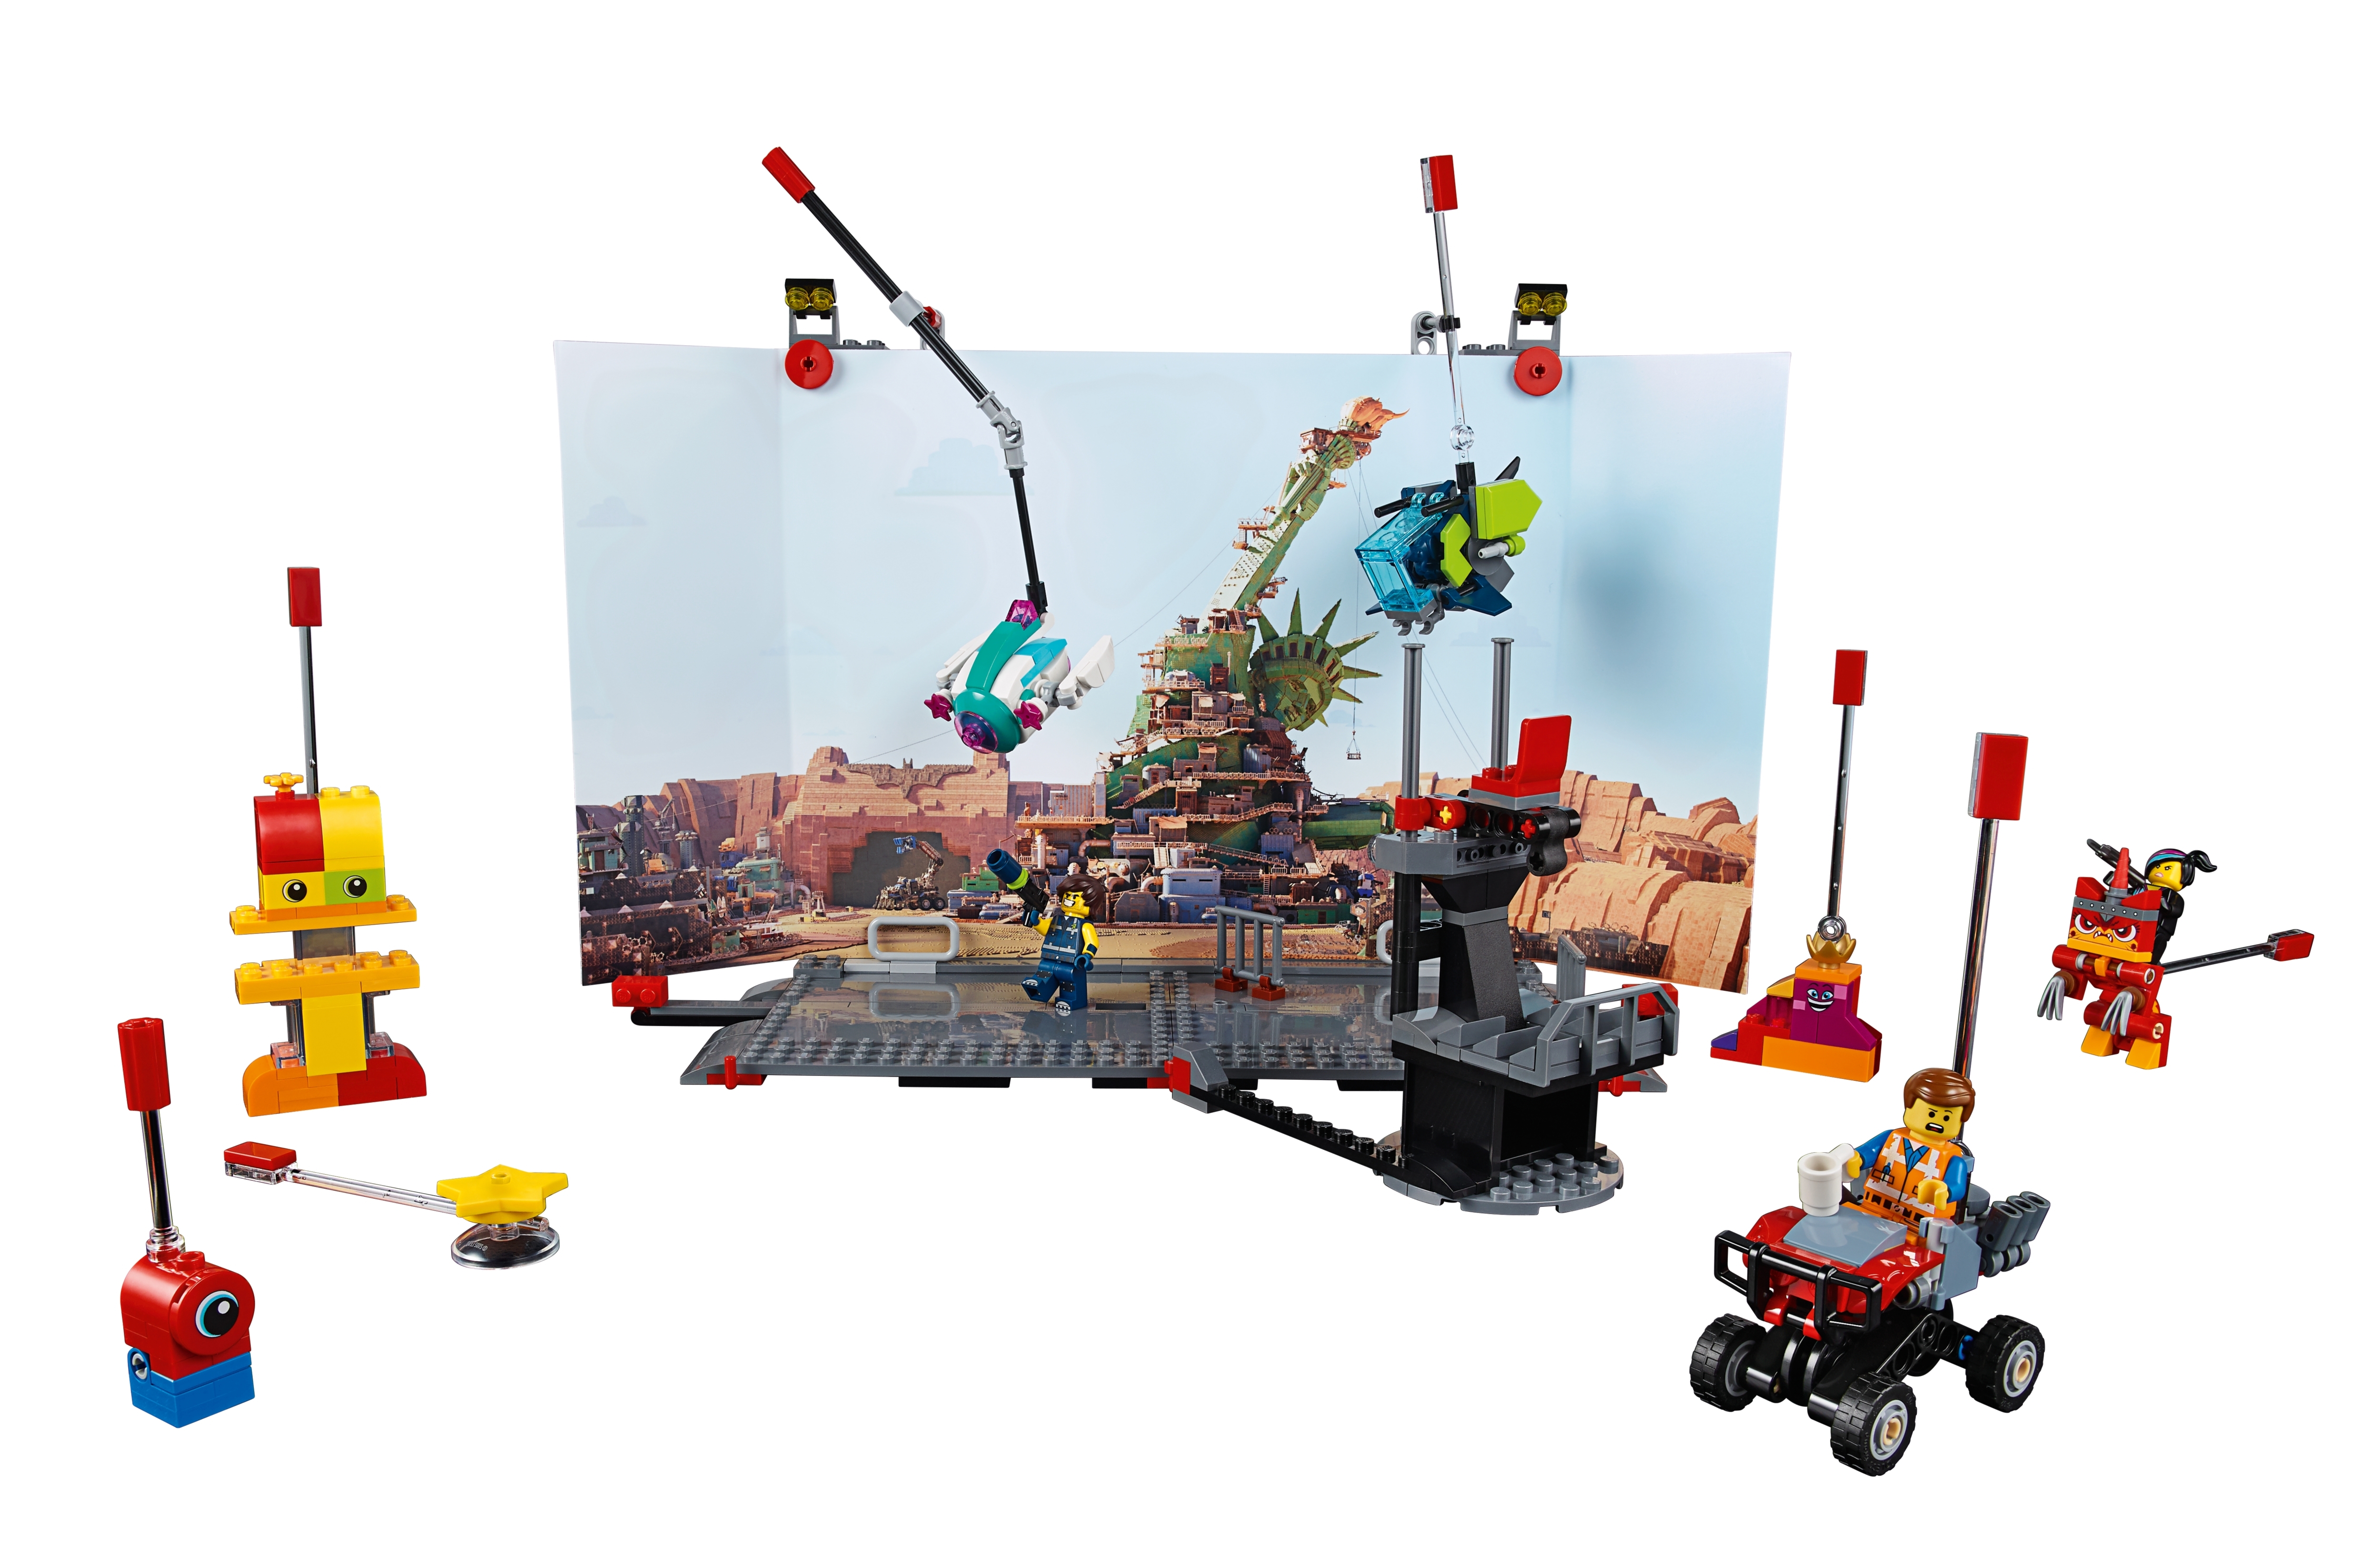 LEGO IN REAL LIFE!* THE REAL LEGO MOVIE 2 SETS FROM THE MOVIE